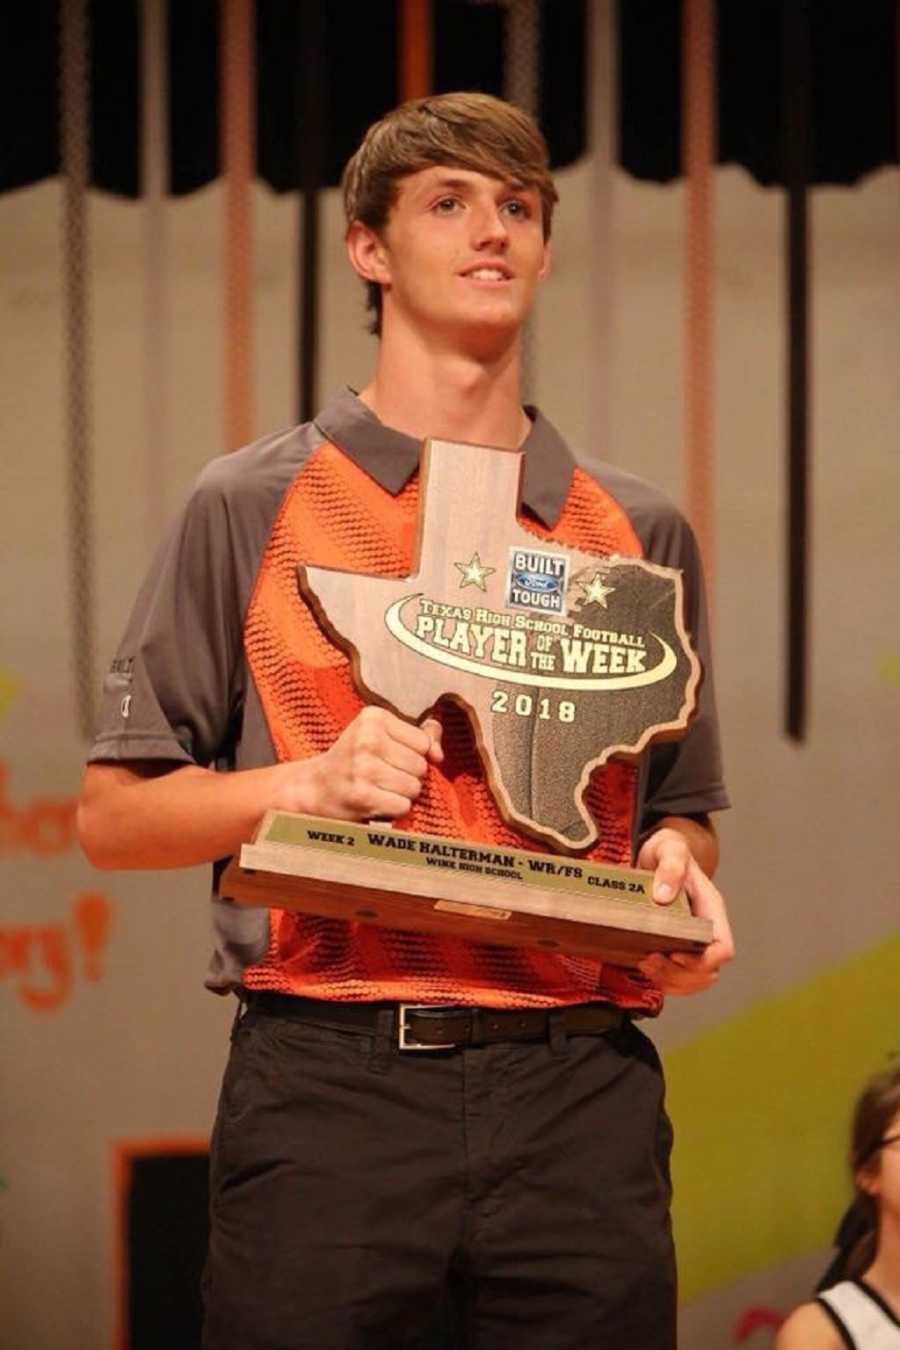 Teen stands holding trophy that says, "Texas High School Football Player of the Week"